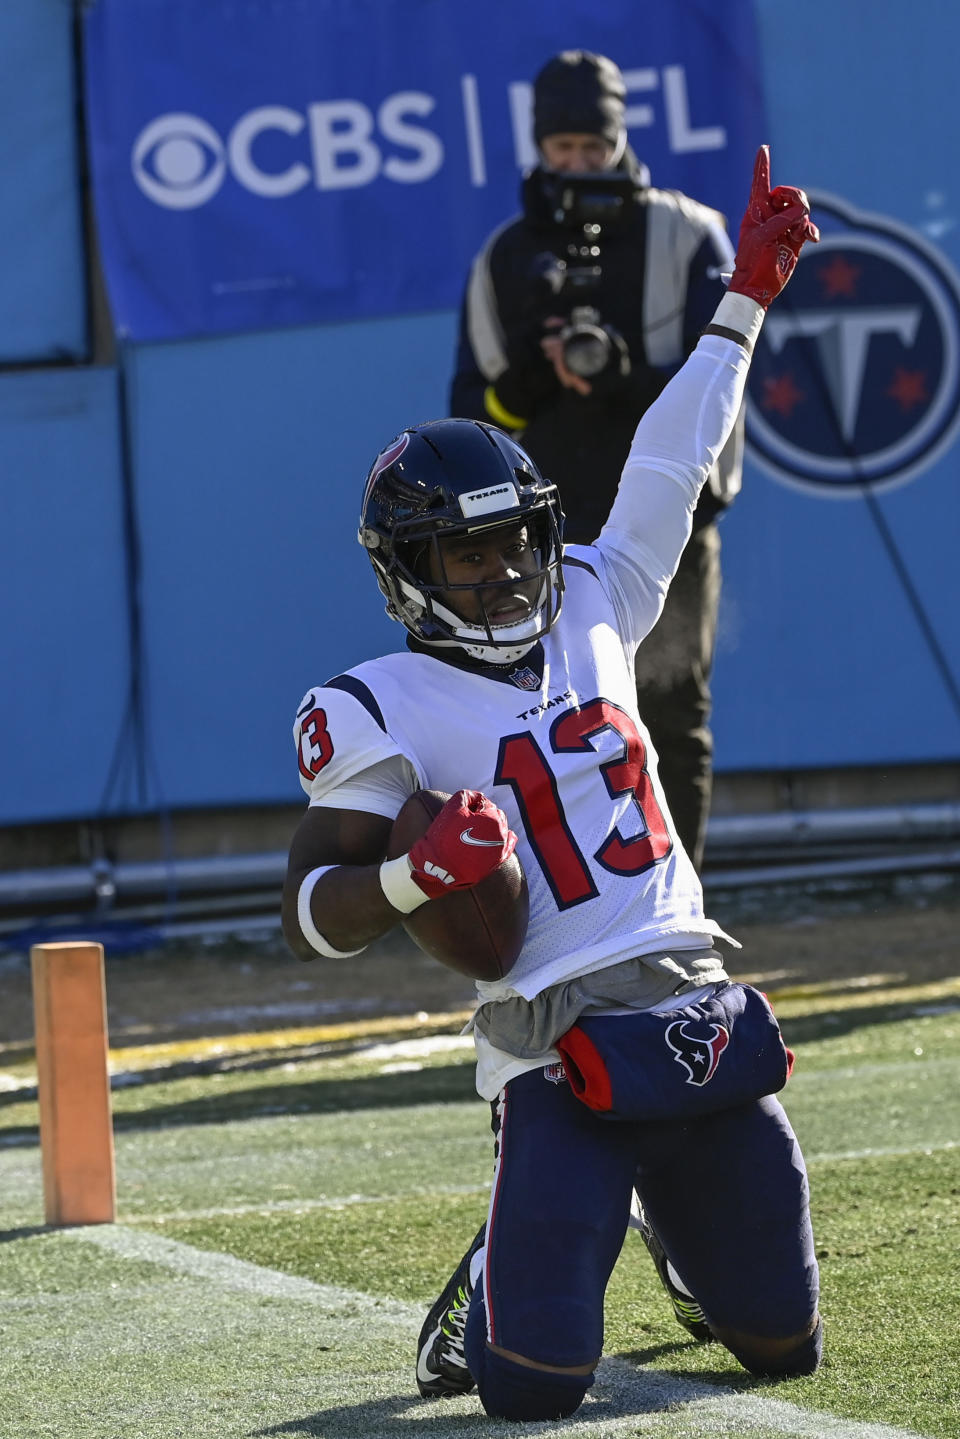 Houston Texans wide receiver Brandin Cooks (13) celebrates his touchdown against the Tennessee Titans during the first half of an NFL football game, Saturday, Dec. 24, 2022, in Nashville, Tenn. (AP Photo/Mark Zaleski)